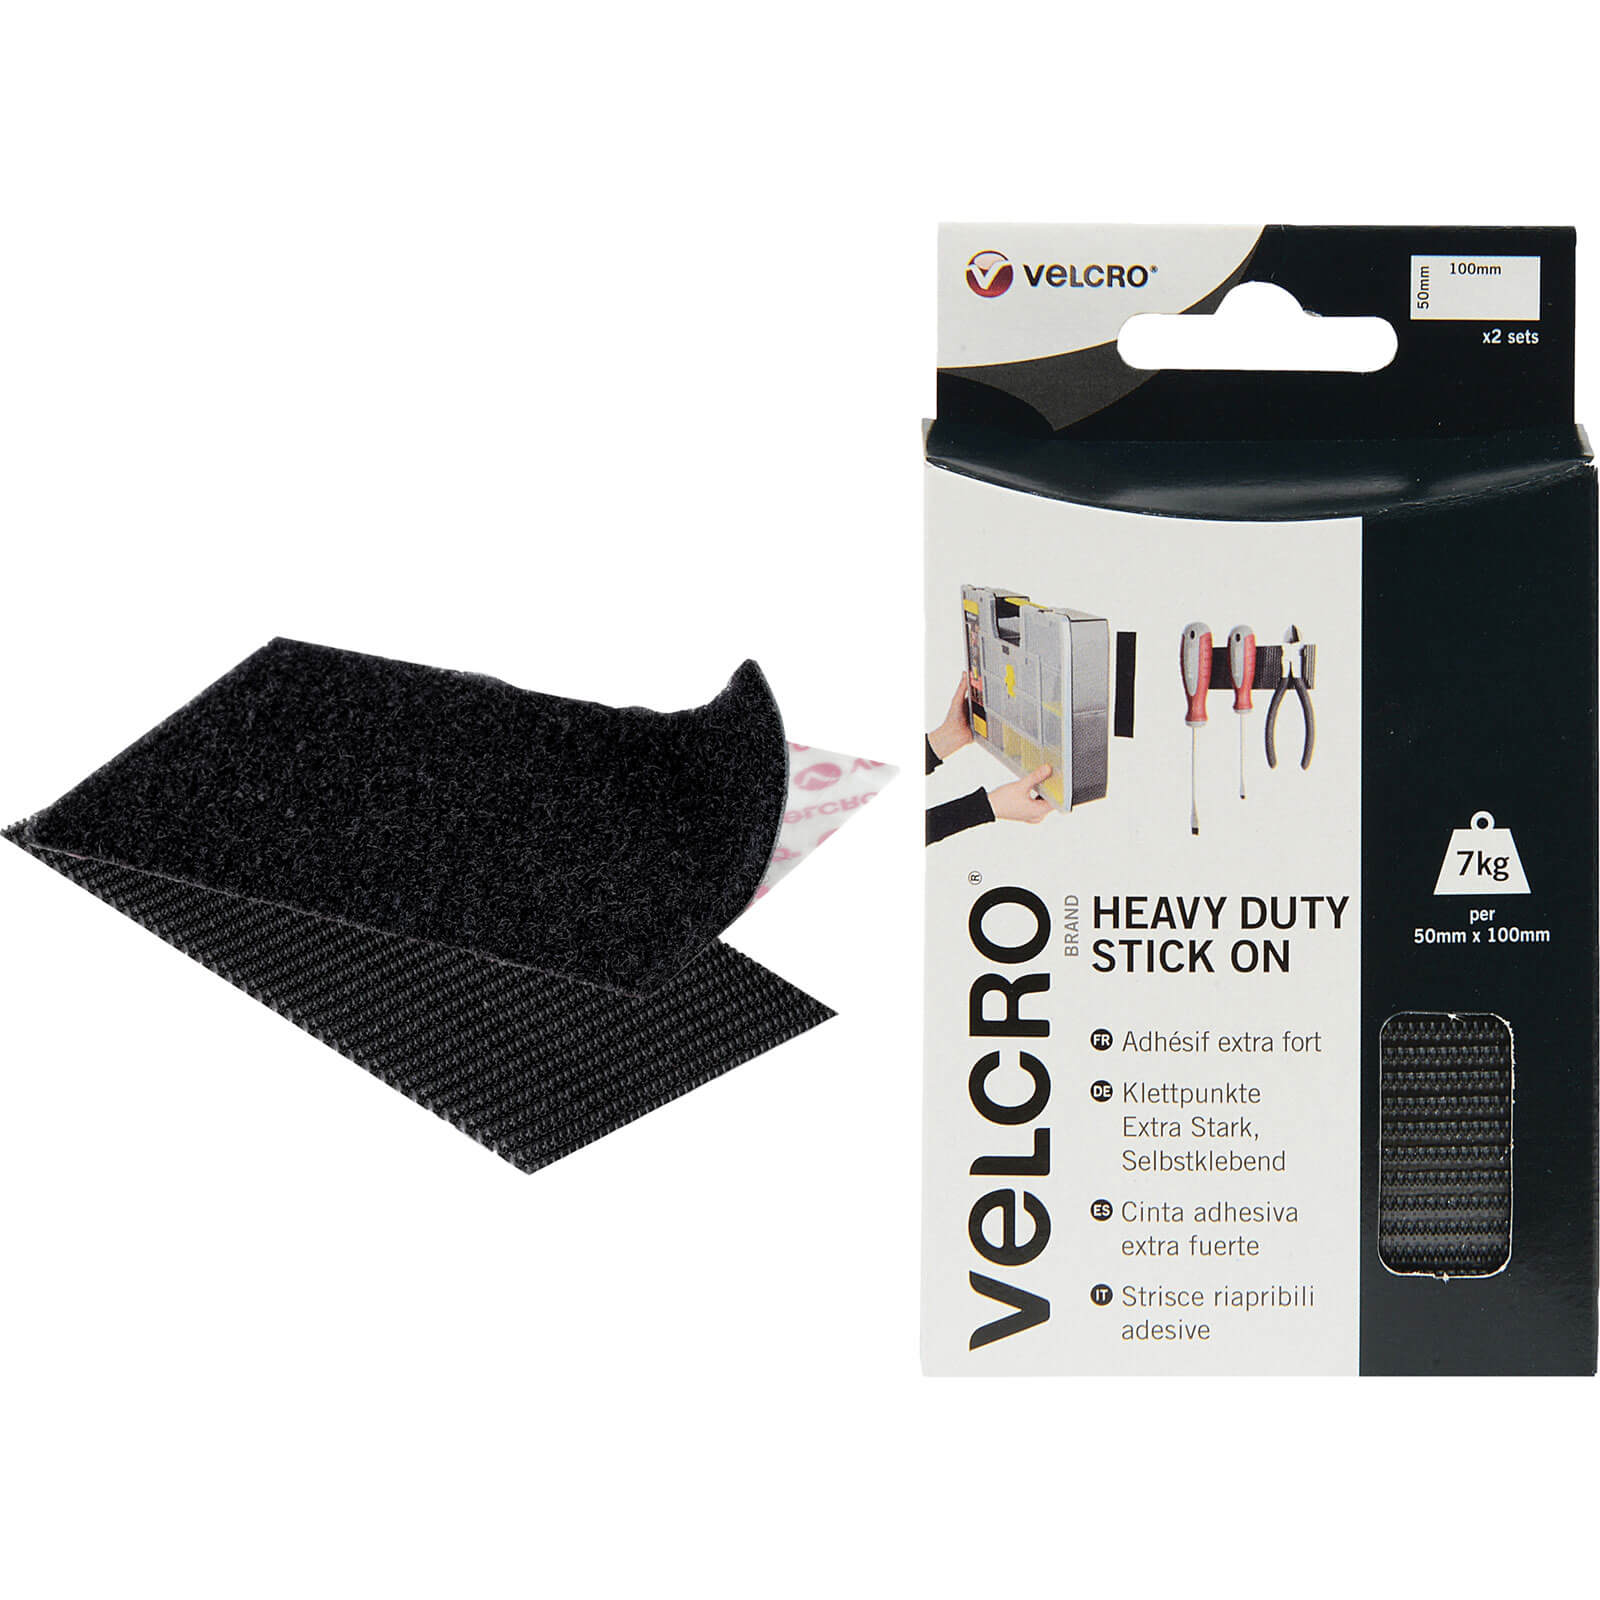 Image of Velcro Heavy Duty Stick On Strips Black 50mm 100mm Pack of 2